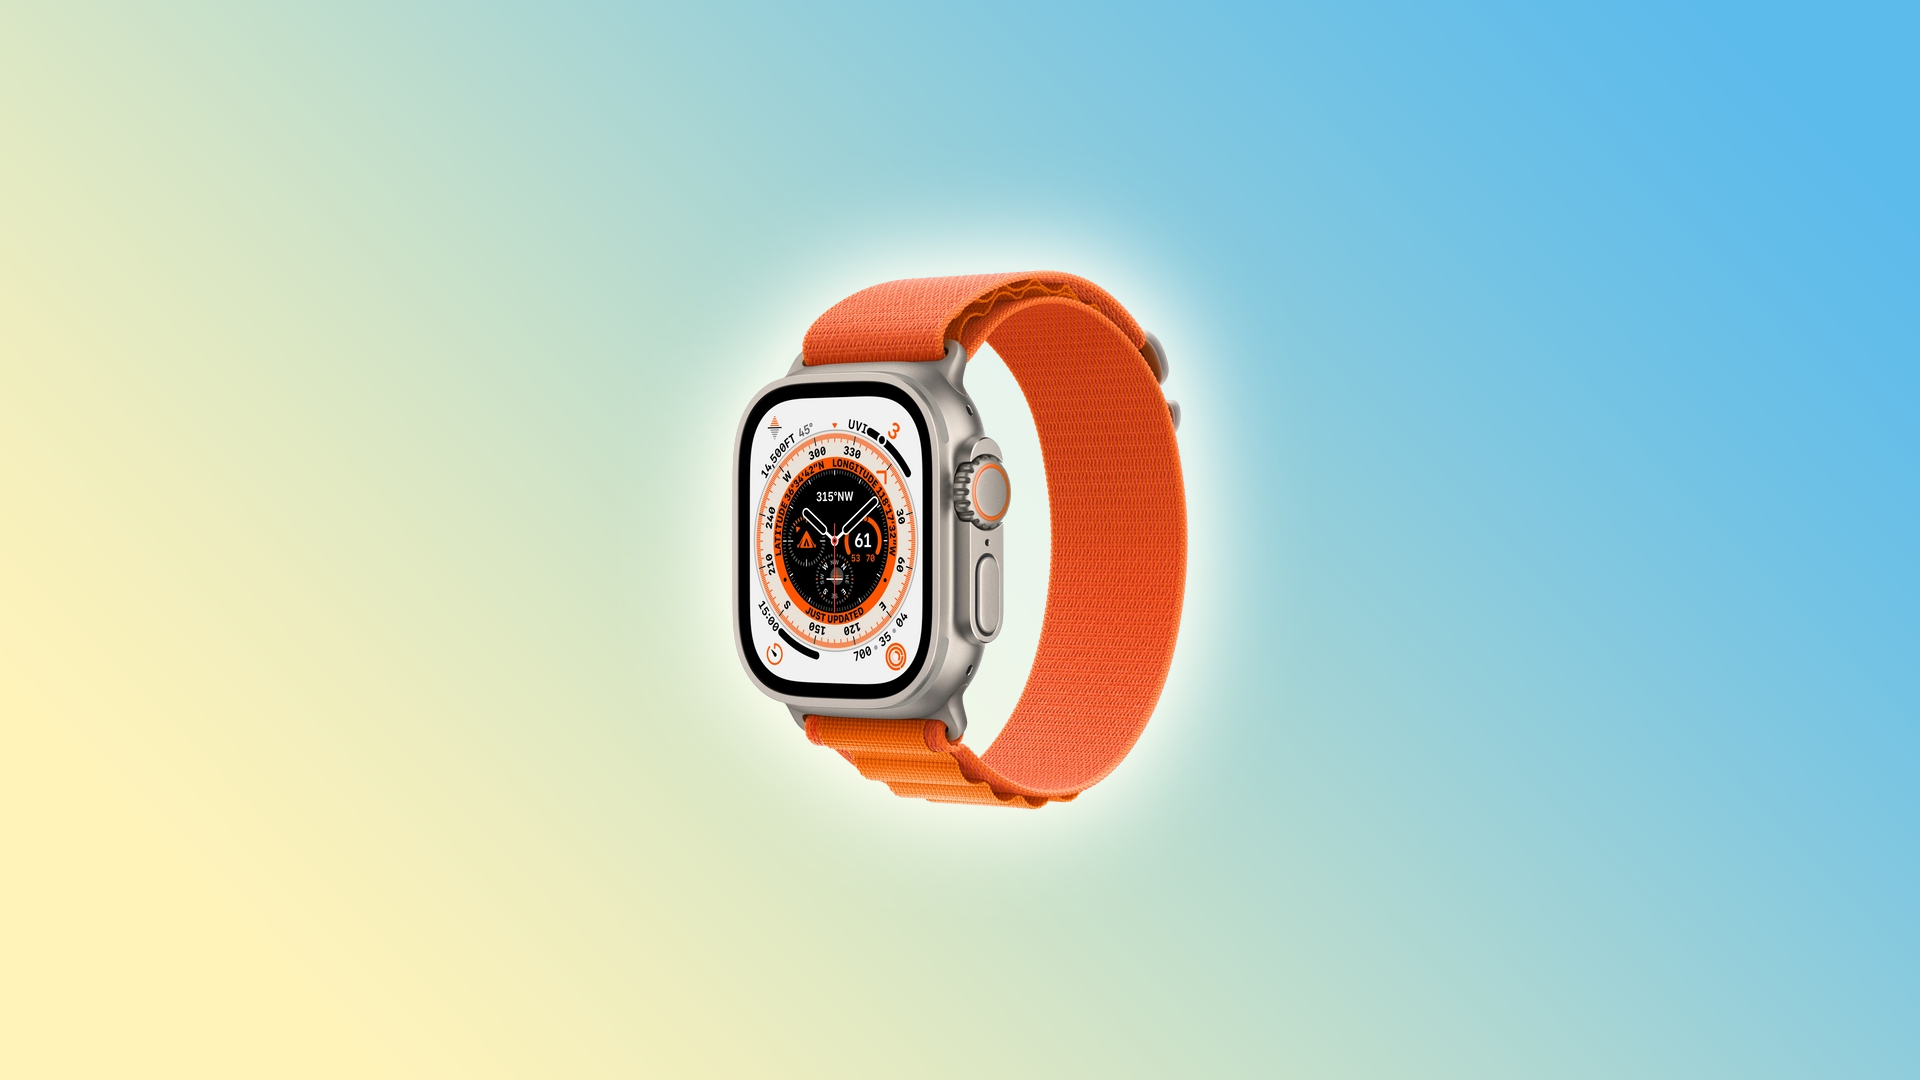 Apple Watch Ultra with a large micro-LED display will be released in 2024